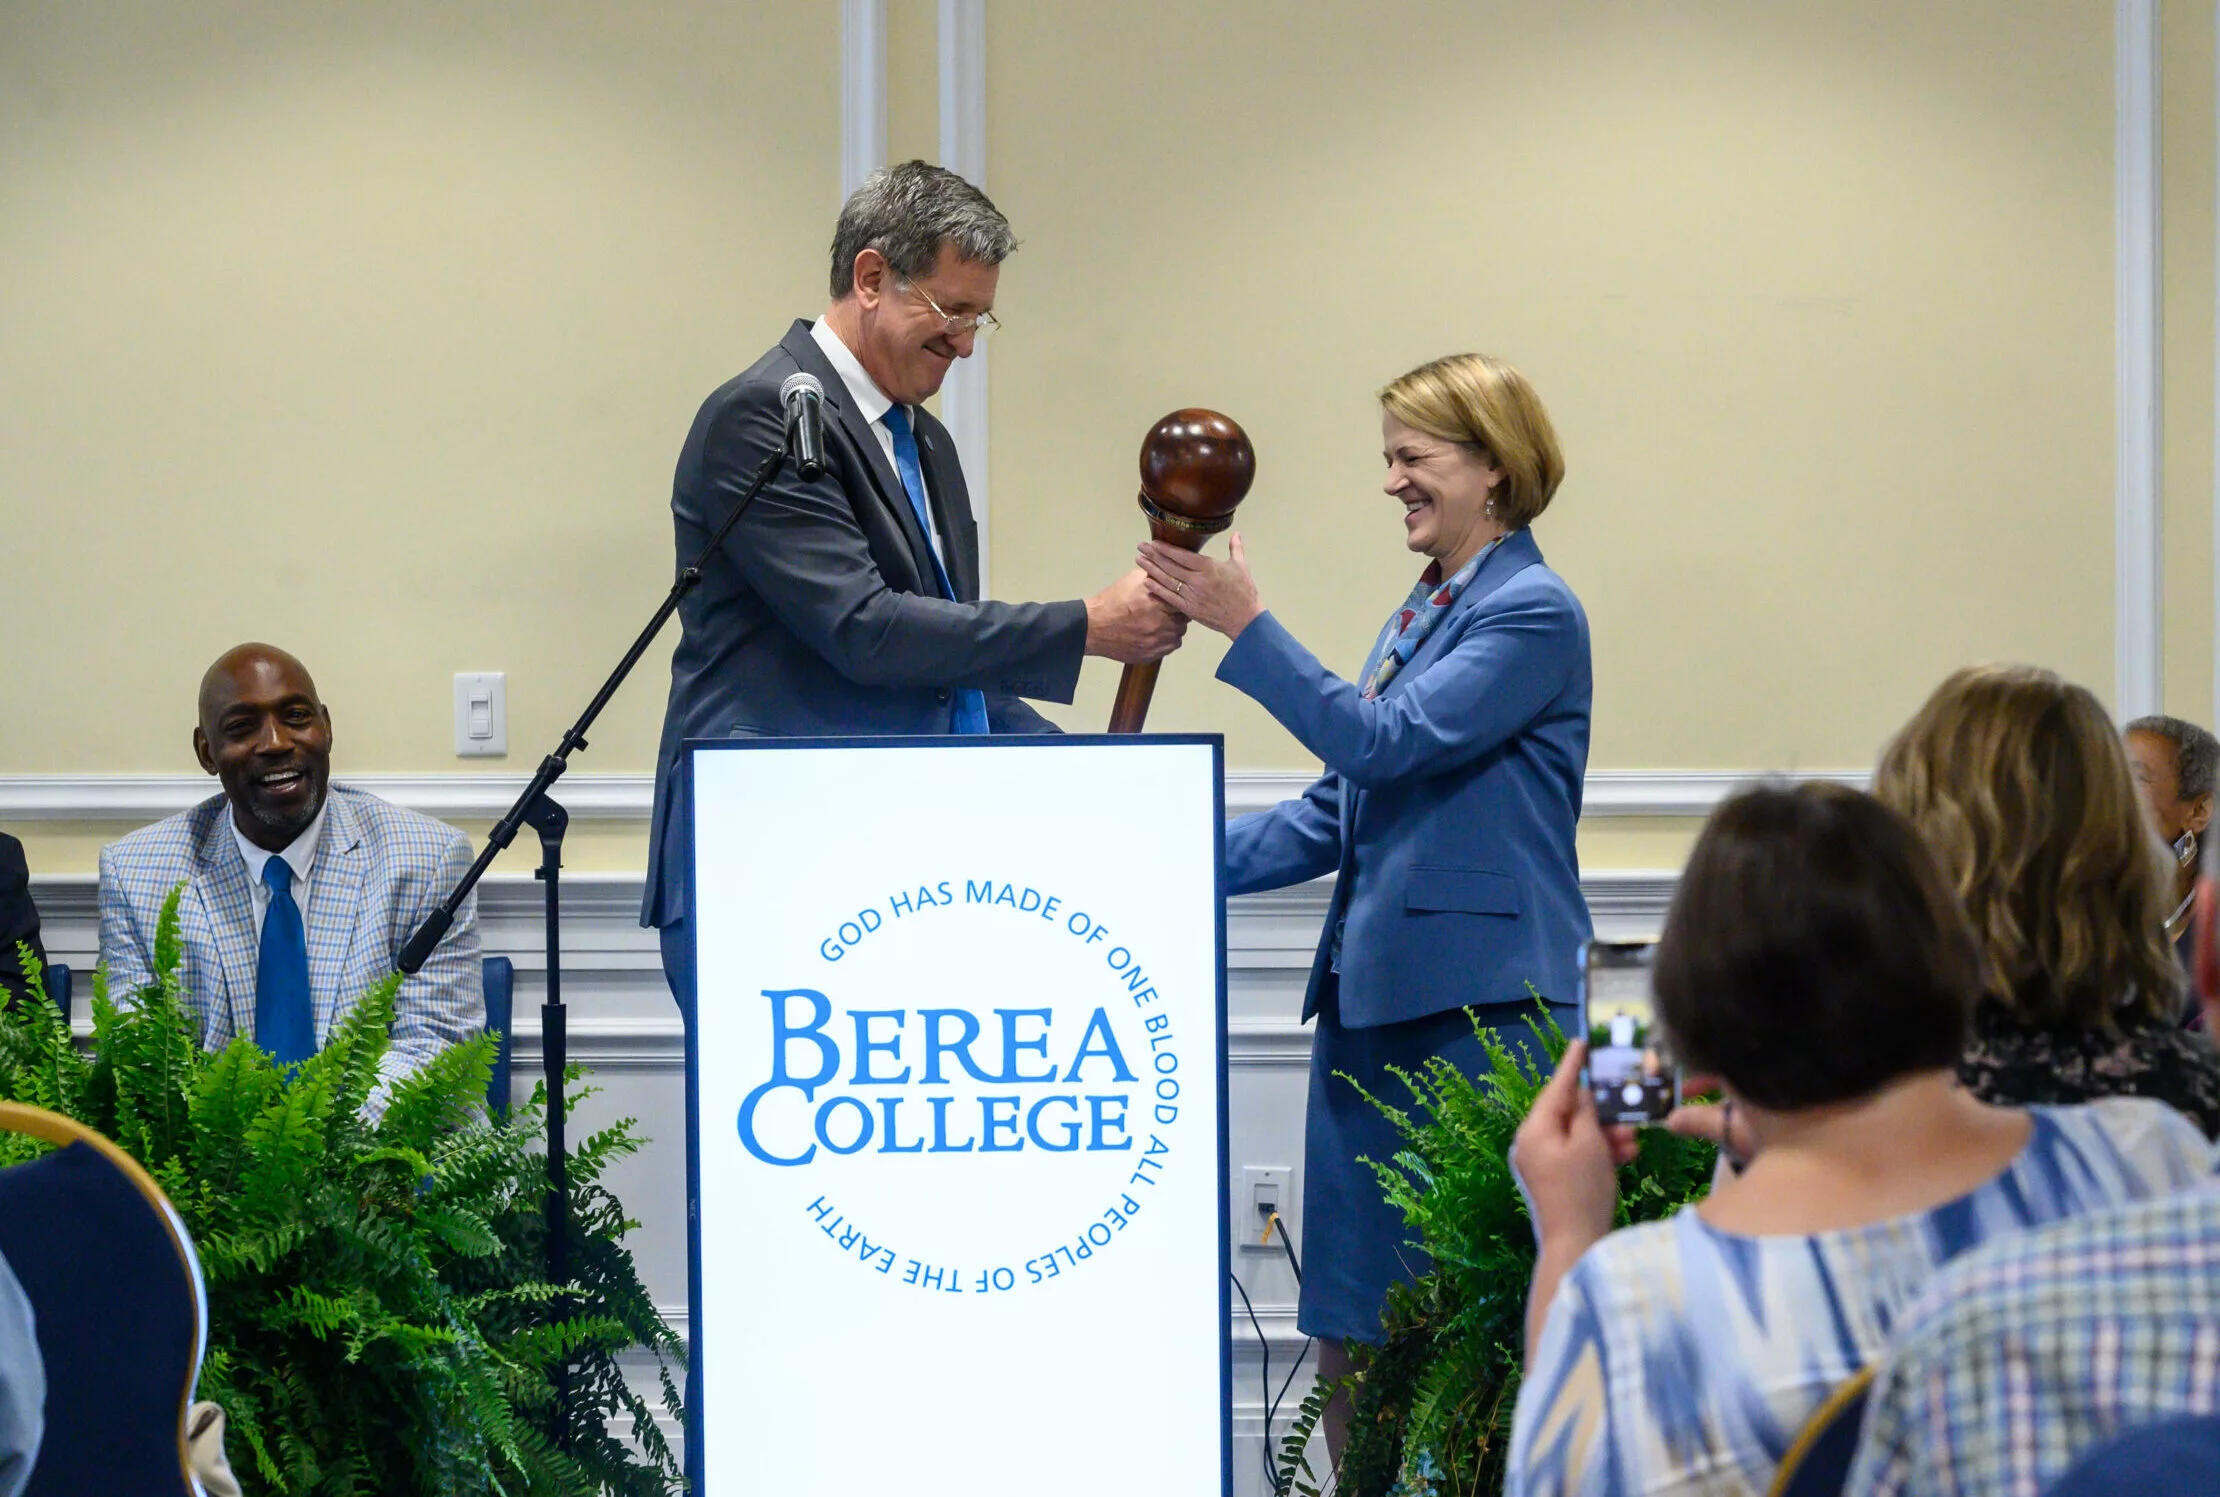 Berea College ‘will not waver’ on racial, social justice, says new president